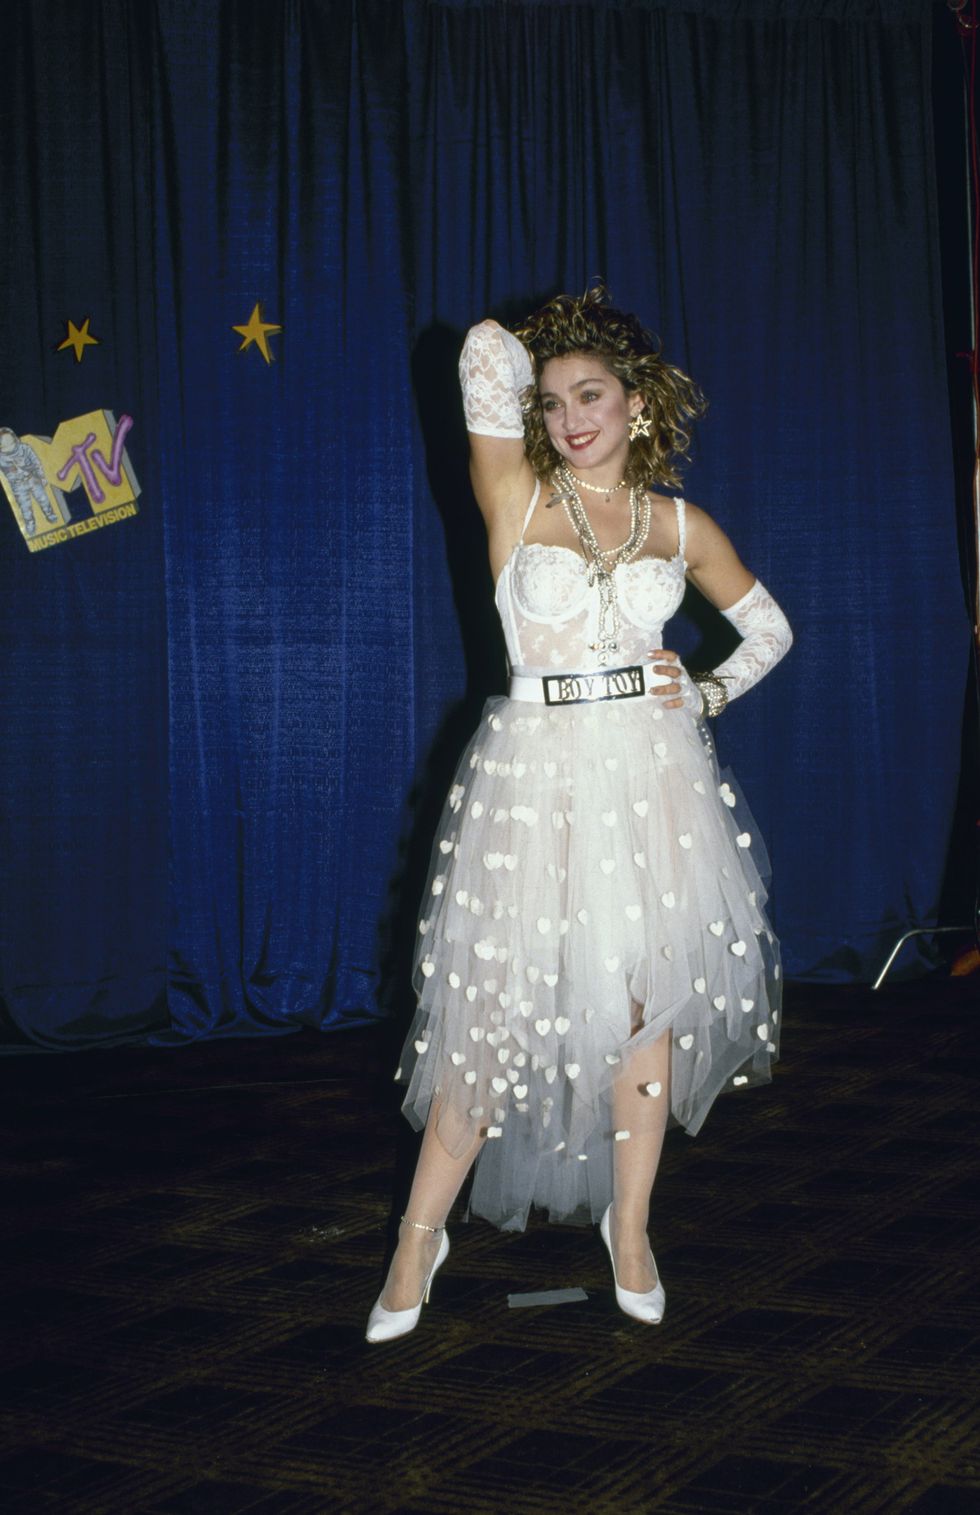 american singer and actress madonna, dressed in white lace lingerie, pearls, and a 'boy toy' belt buckle, stands with one hand on her head and one on her hip at first annual mtv video music awards, held at tavern on the green, new york, new york, september 14, 1984 photo by david mcgoughdmithe life picture collection via getty images